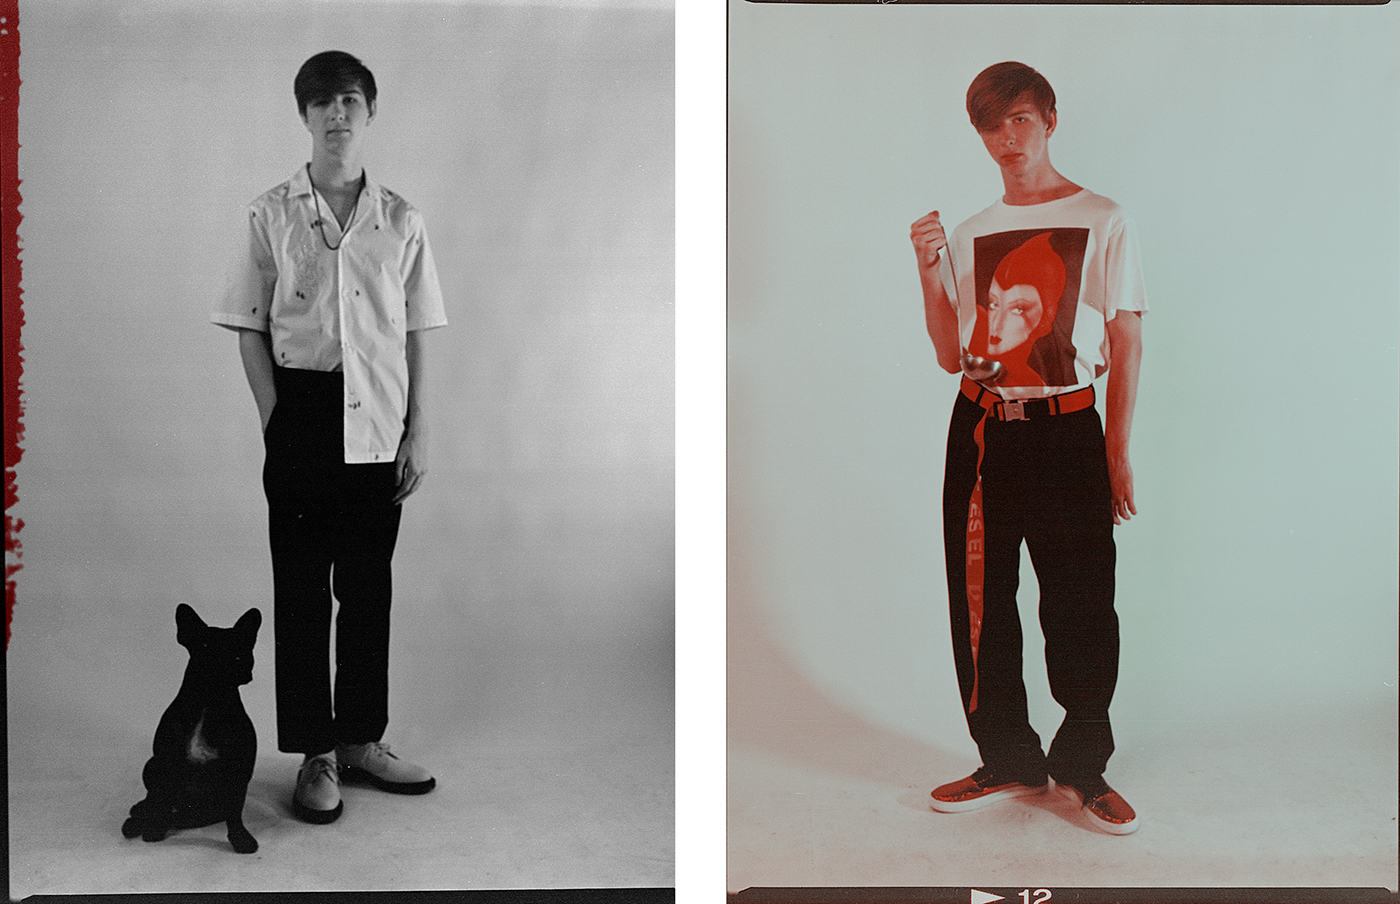 Left: Shirt by Salvatore Ferragamo. T-shirt by Topman. Trousers by McQ. Shoes by Dr. Martens. Necklace, talent's own.Right: All clothing by Stella McCartney. Belt by Diesel. Sneakers by Ports 1961.